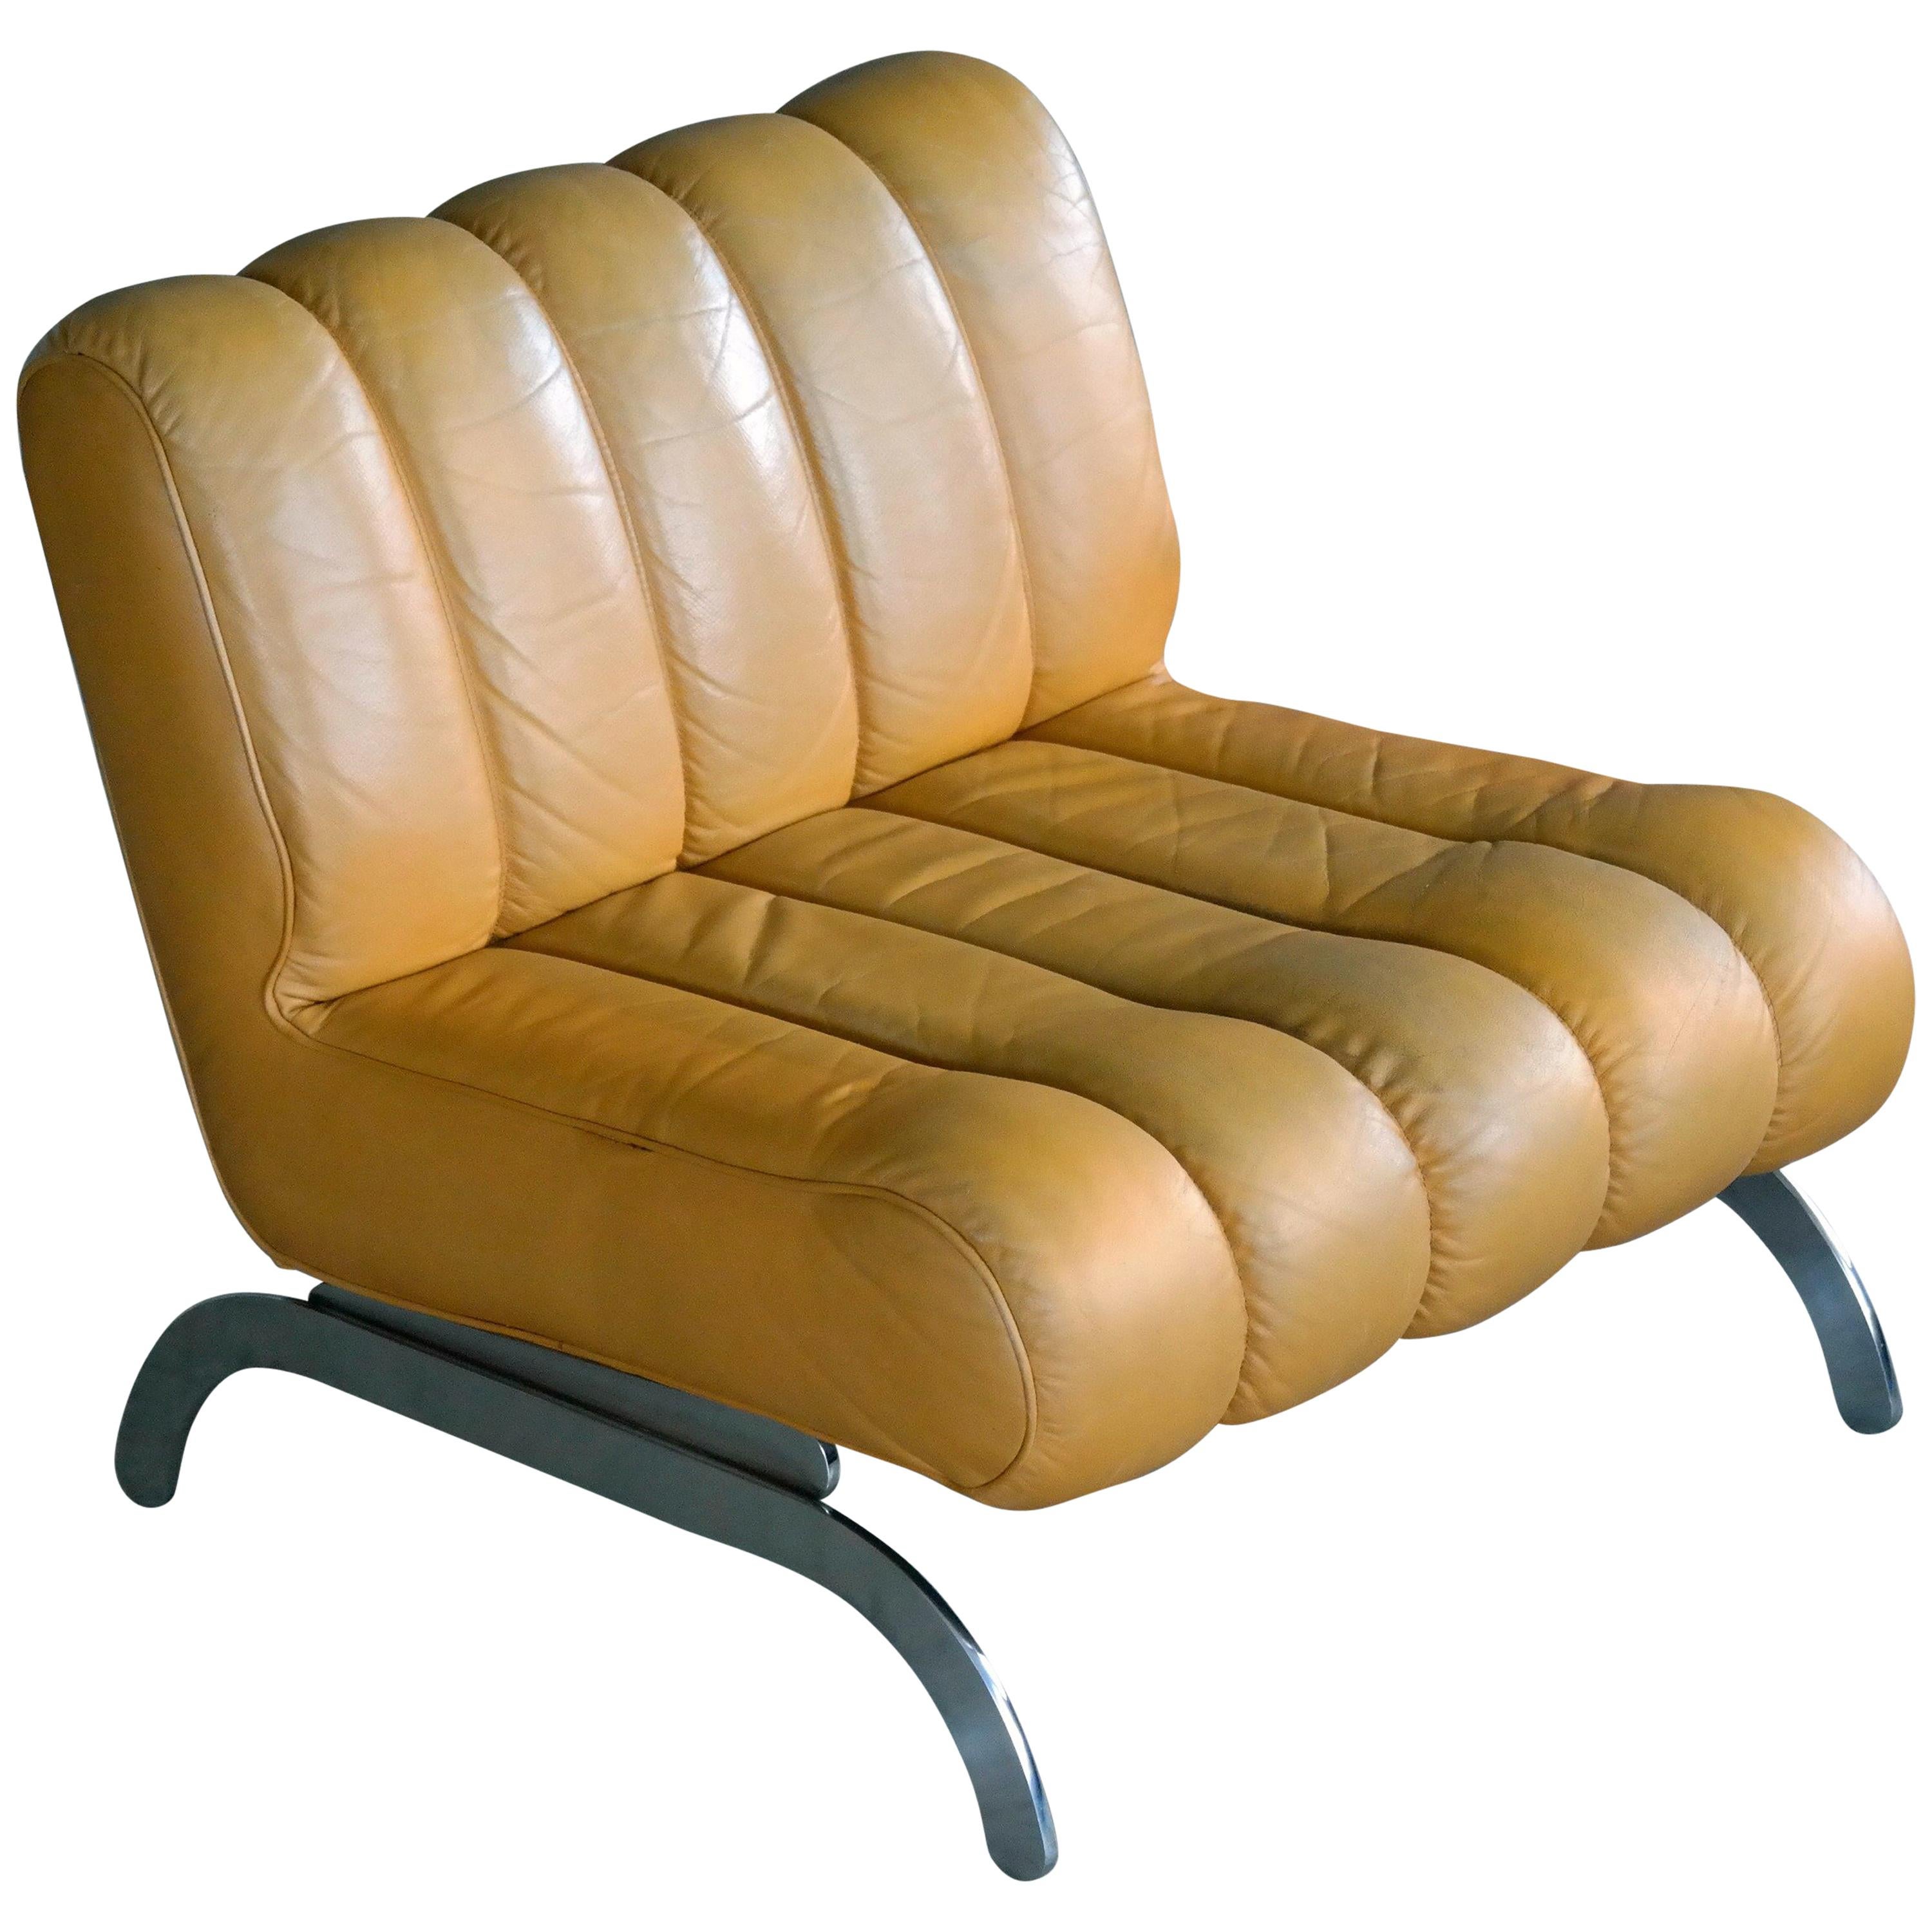 Midcentury Independence Lounge Chair in Mustard Yellow Leather by Karl Wittmann